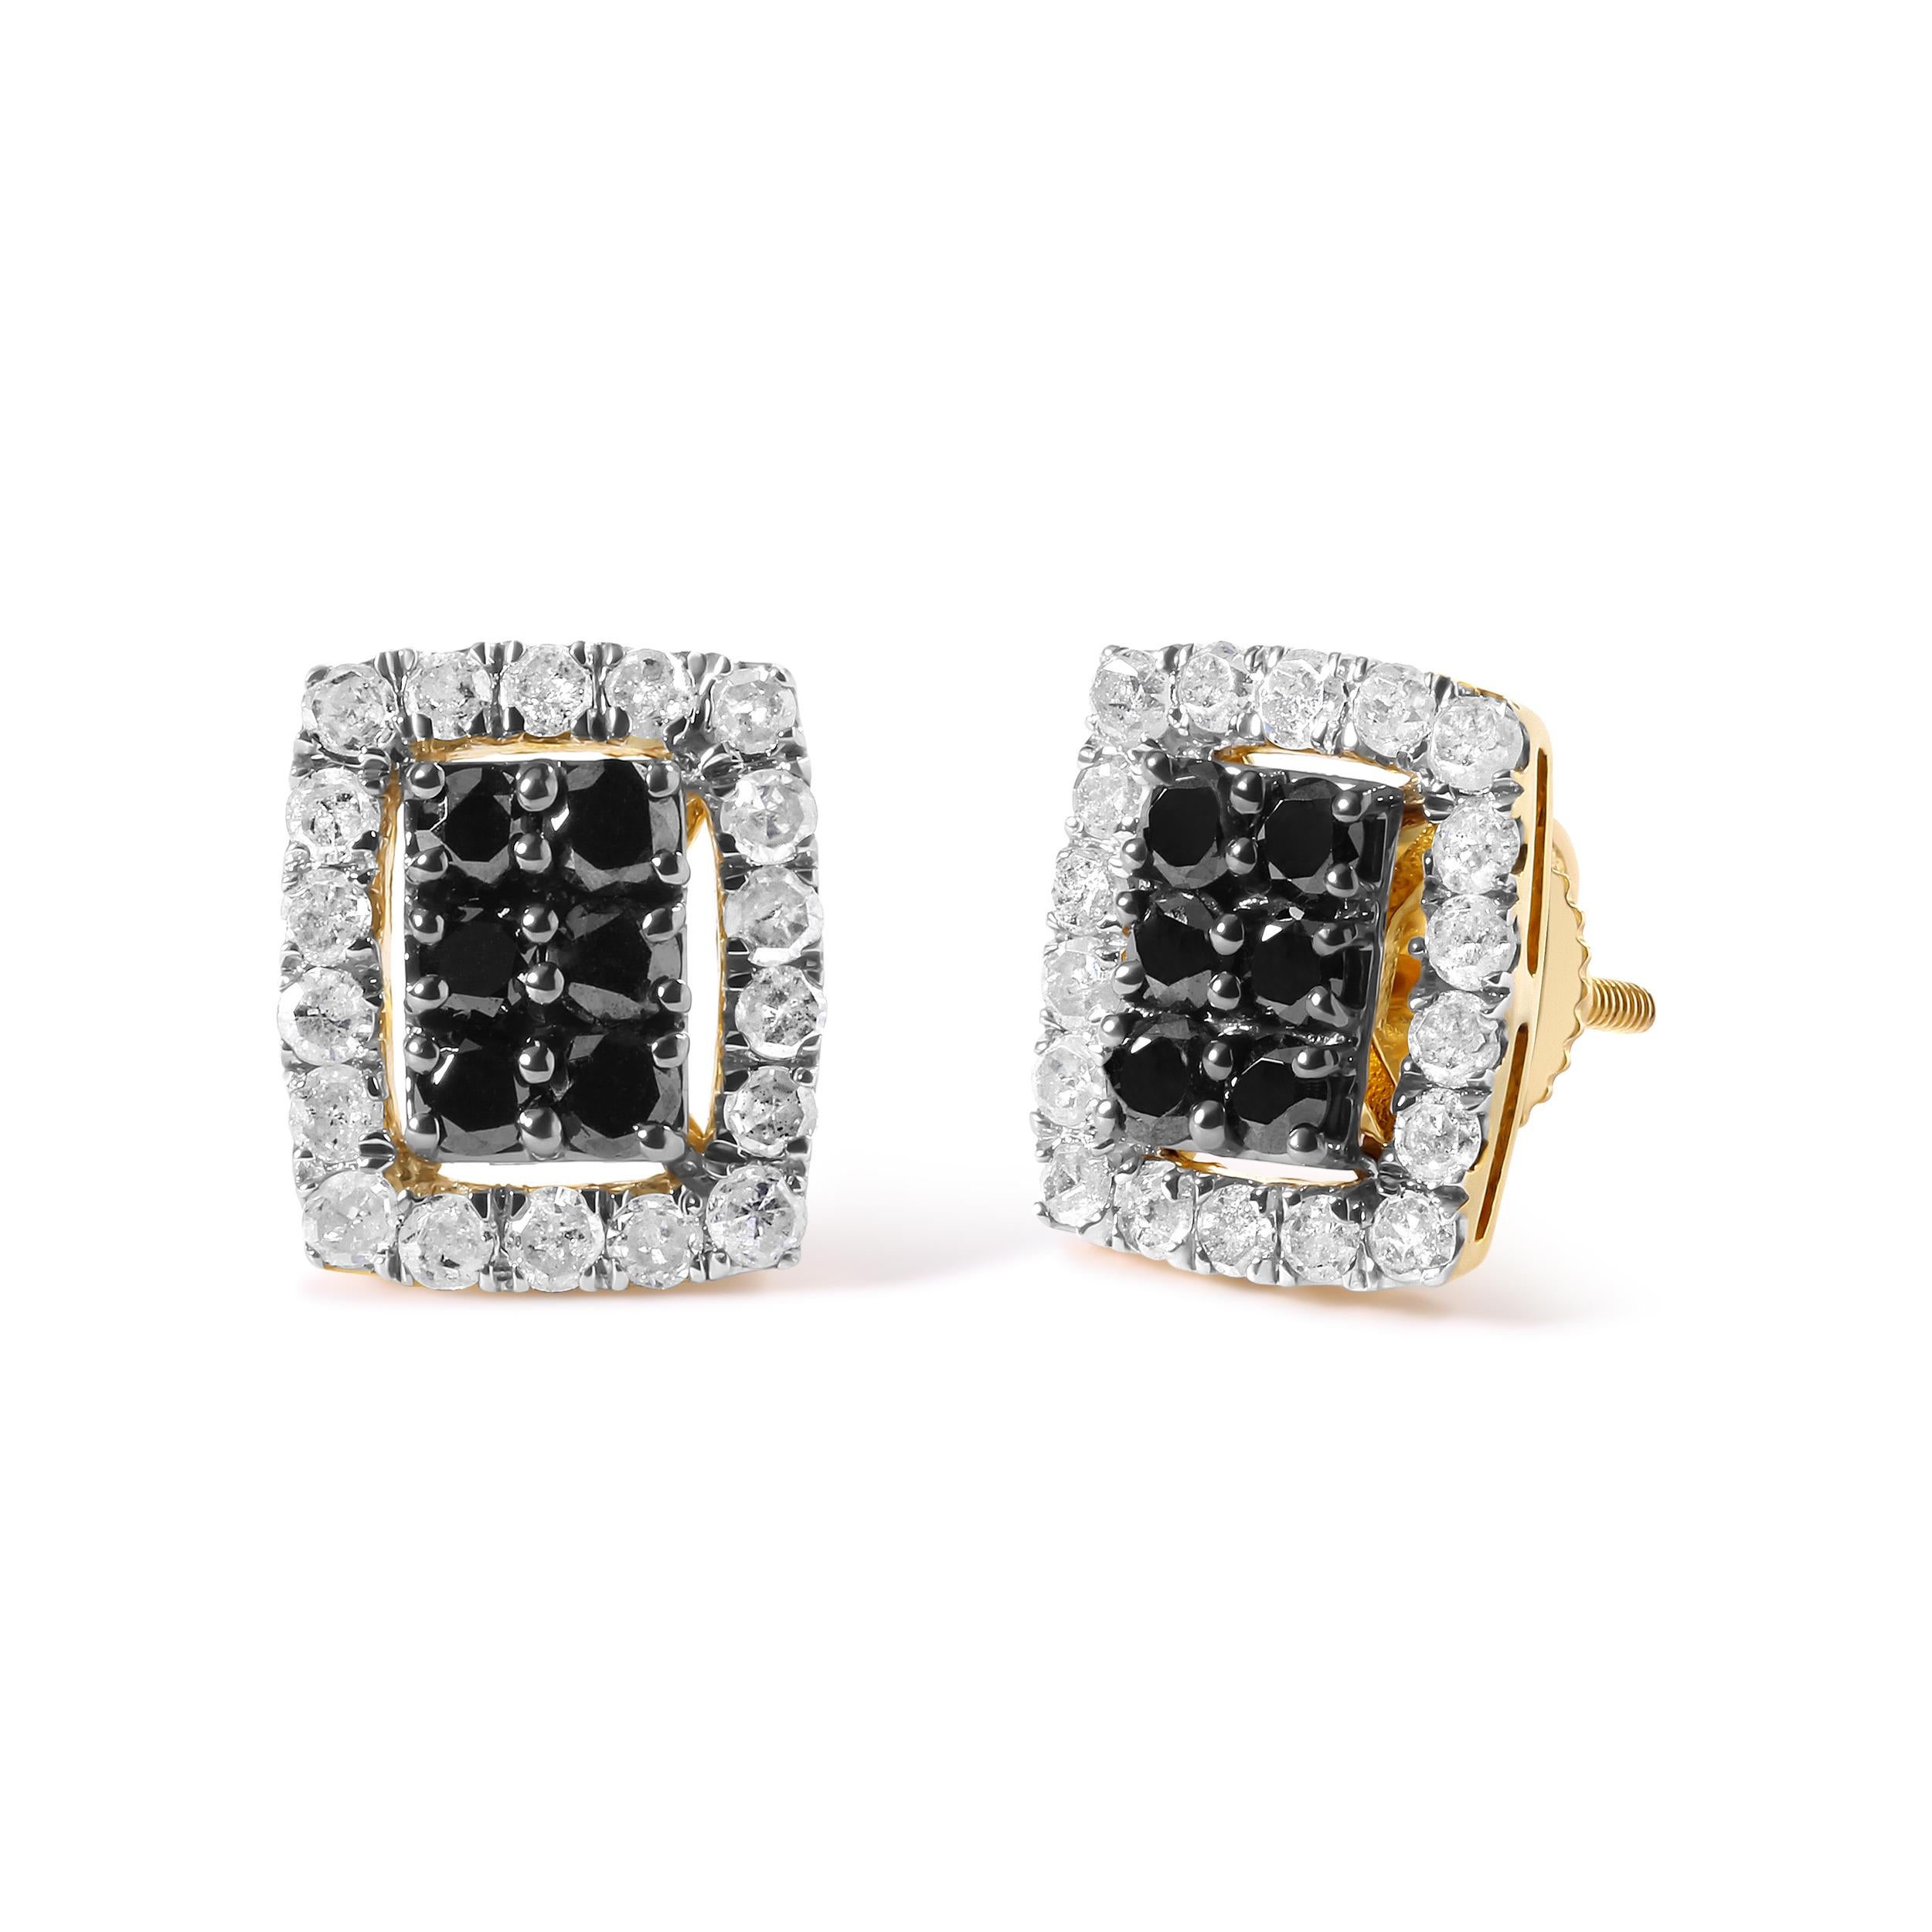 Indulge in the luxury of these stunning diamond stud earrings. Crafted from gleaming 10K yellow gold, these earrings boast a mesmerizing combination of black and white diamonds. With a total of 48 natural diamonds, including 12 black color treated